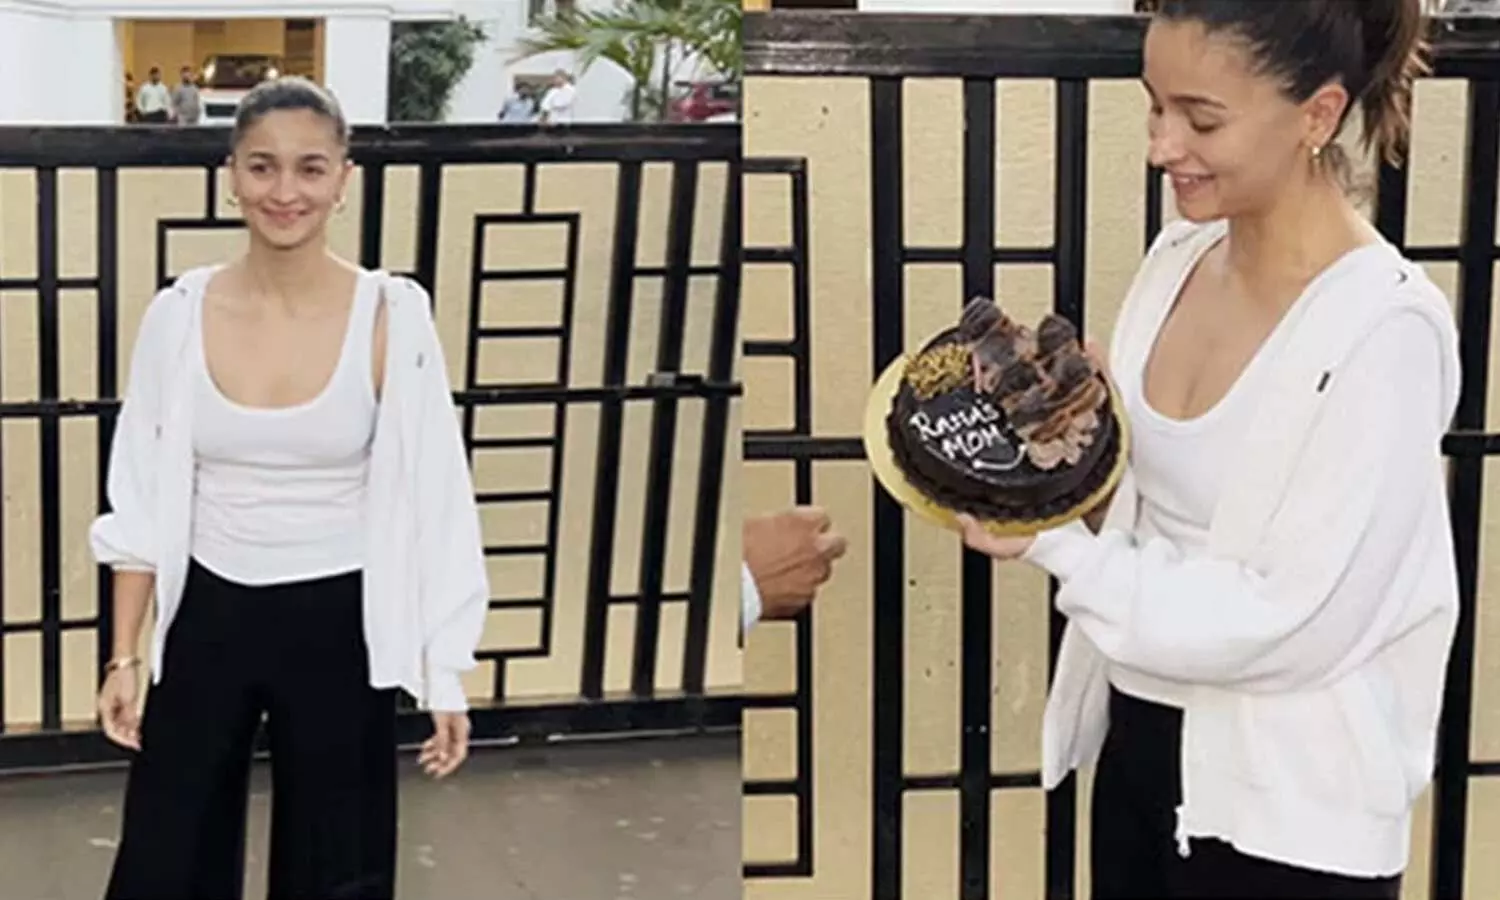 Alia cant stop smiling as she cuts a cake with Rahas mom written on it